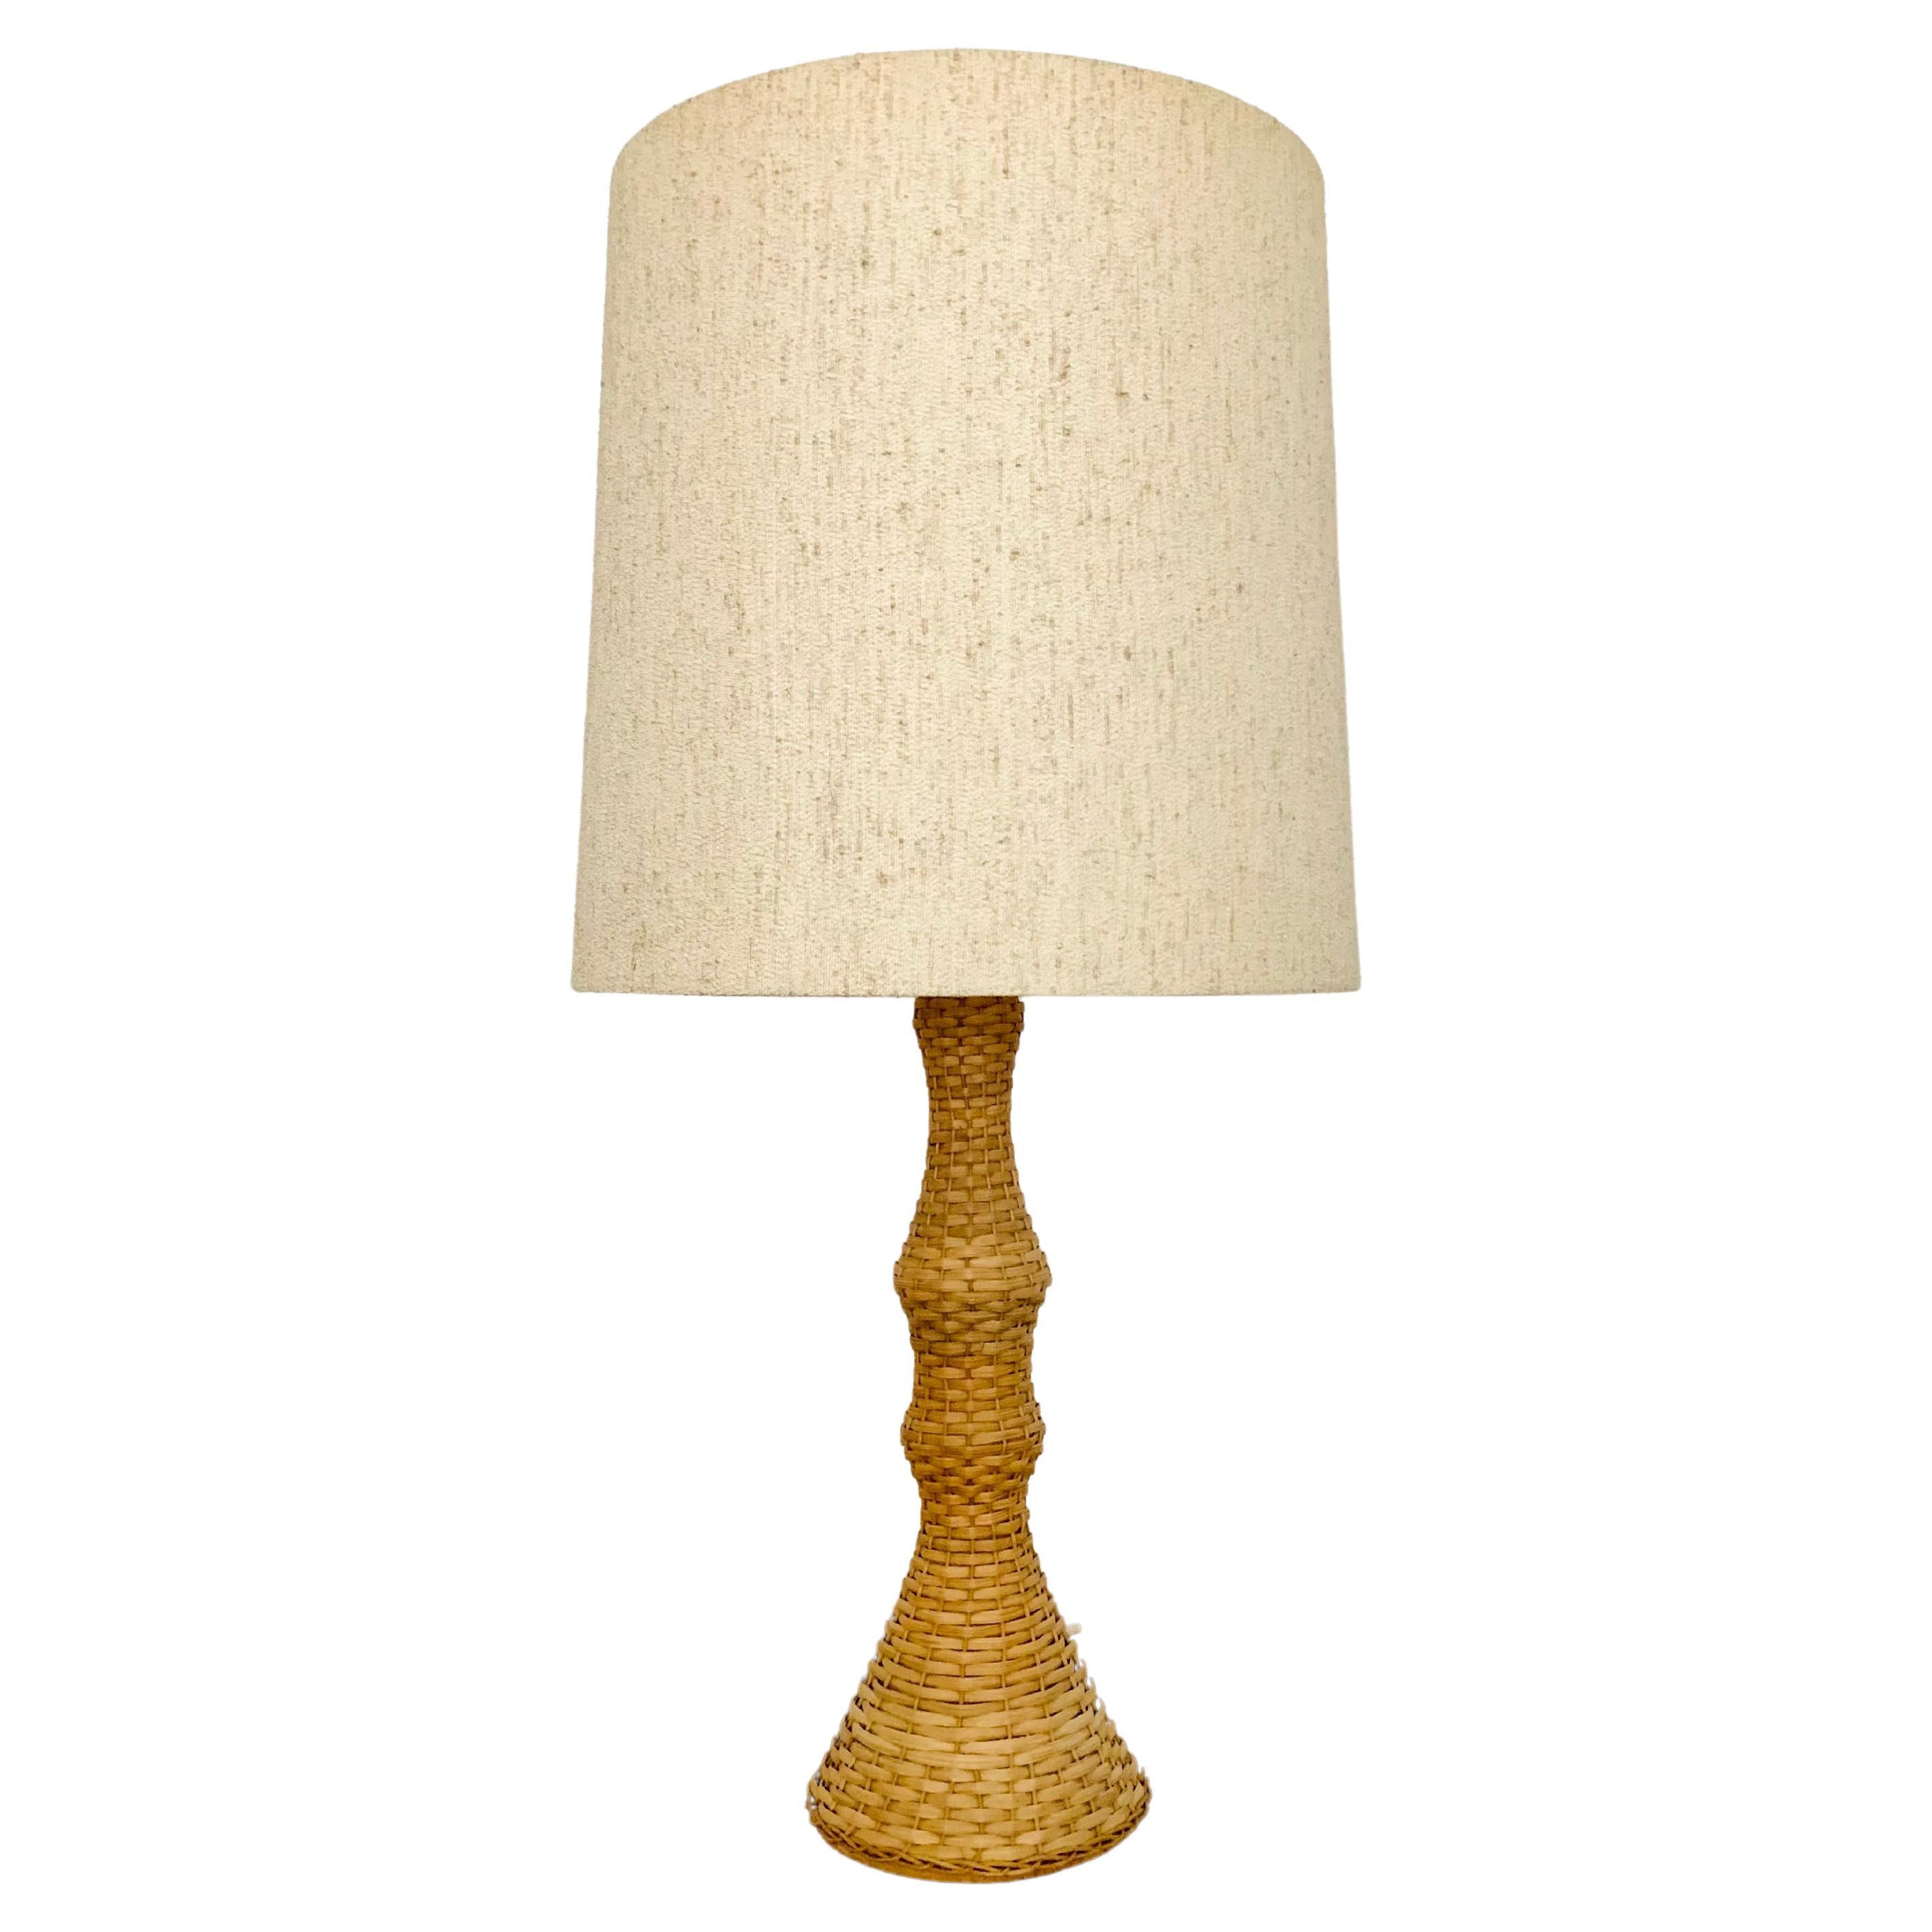 Wicker Table Lamp For Sale